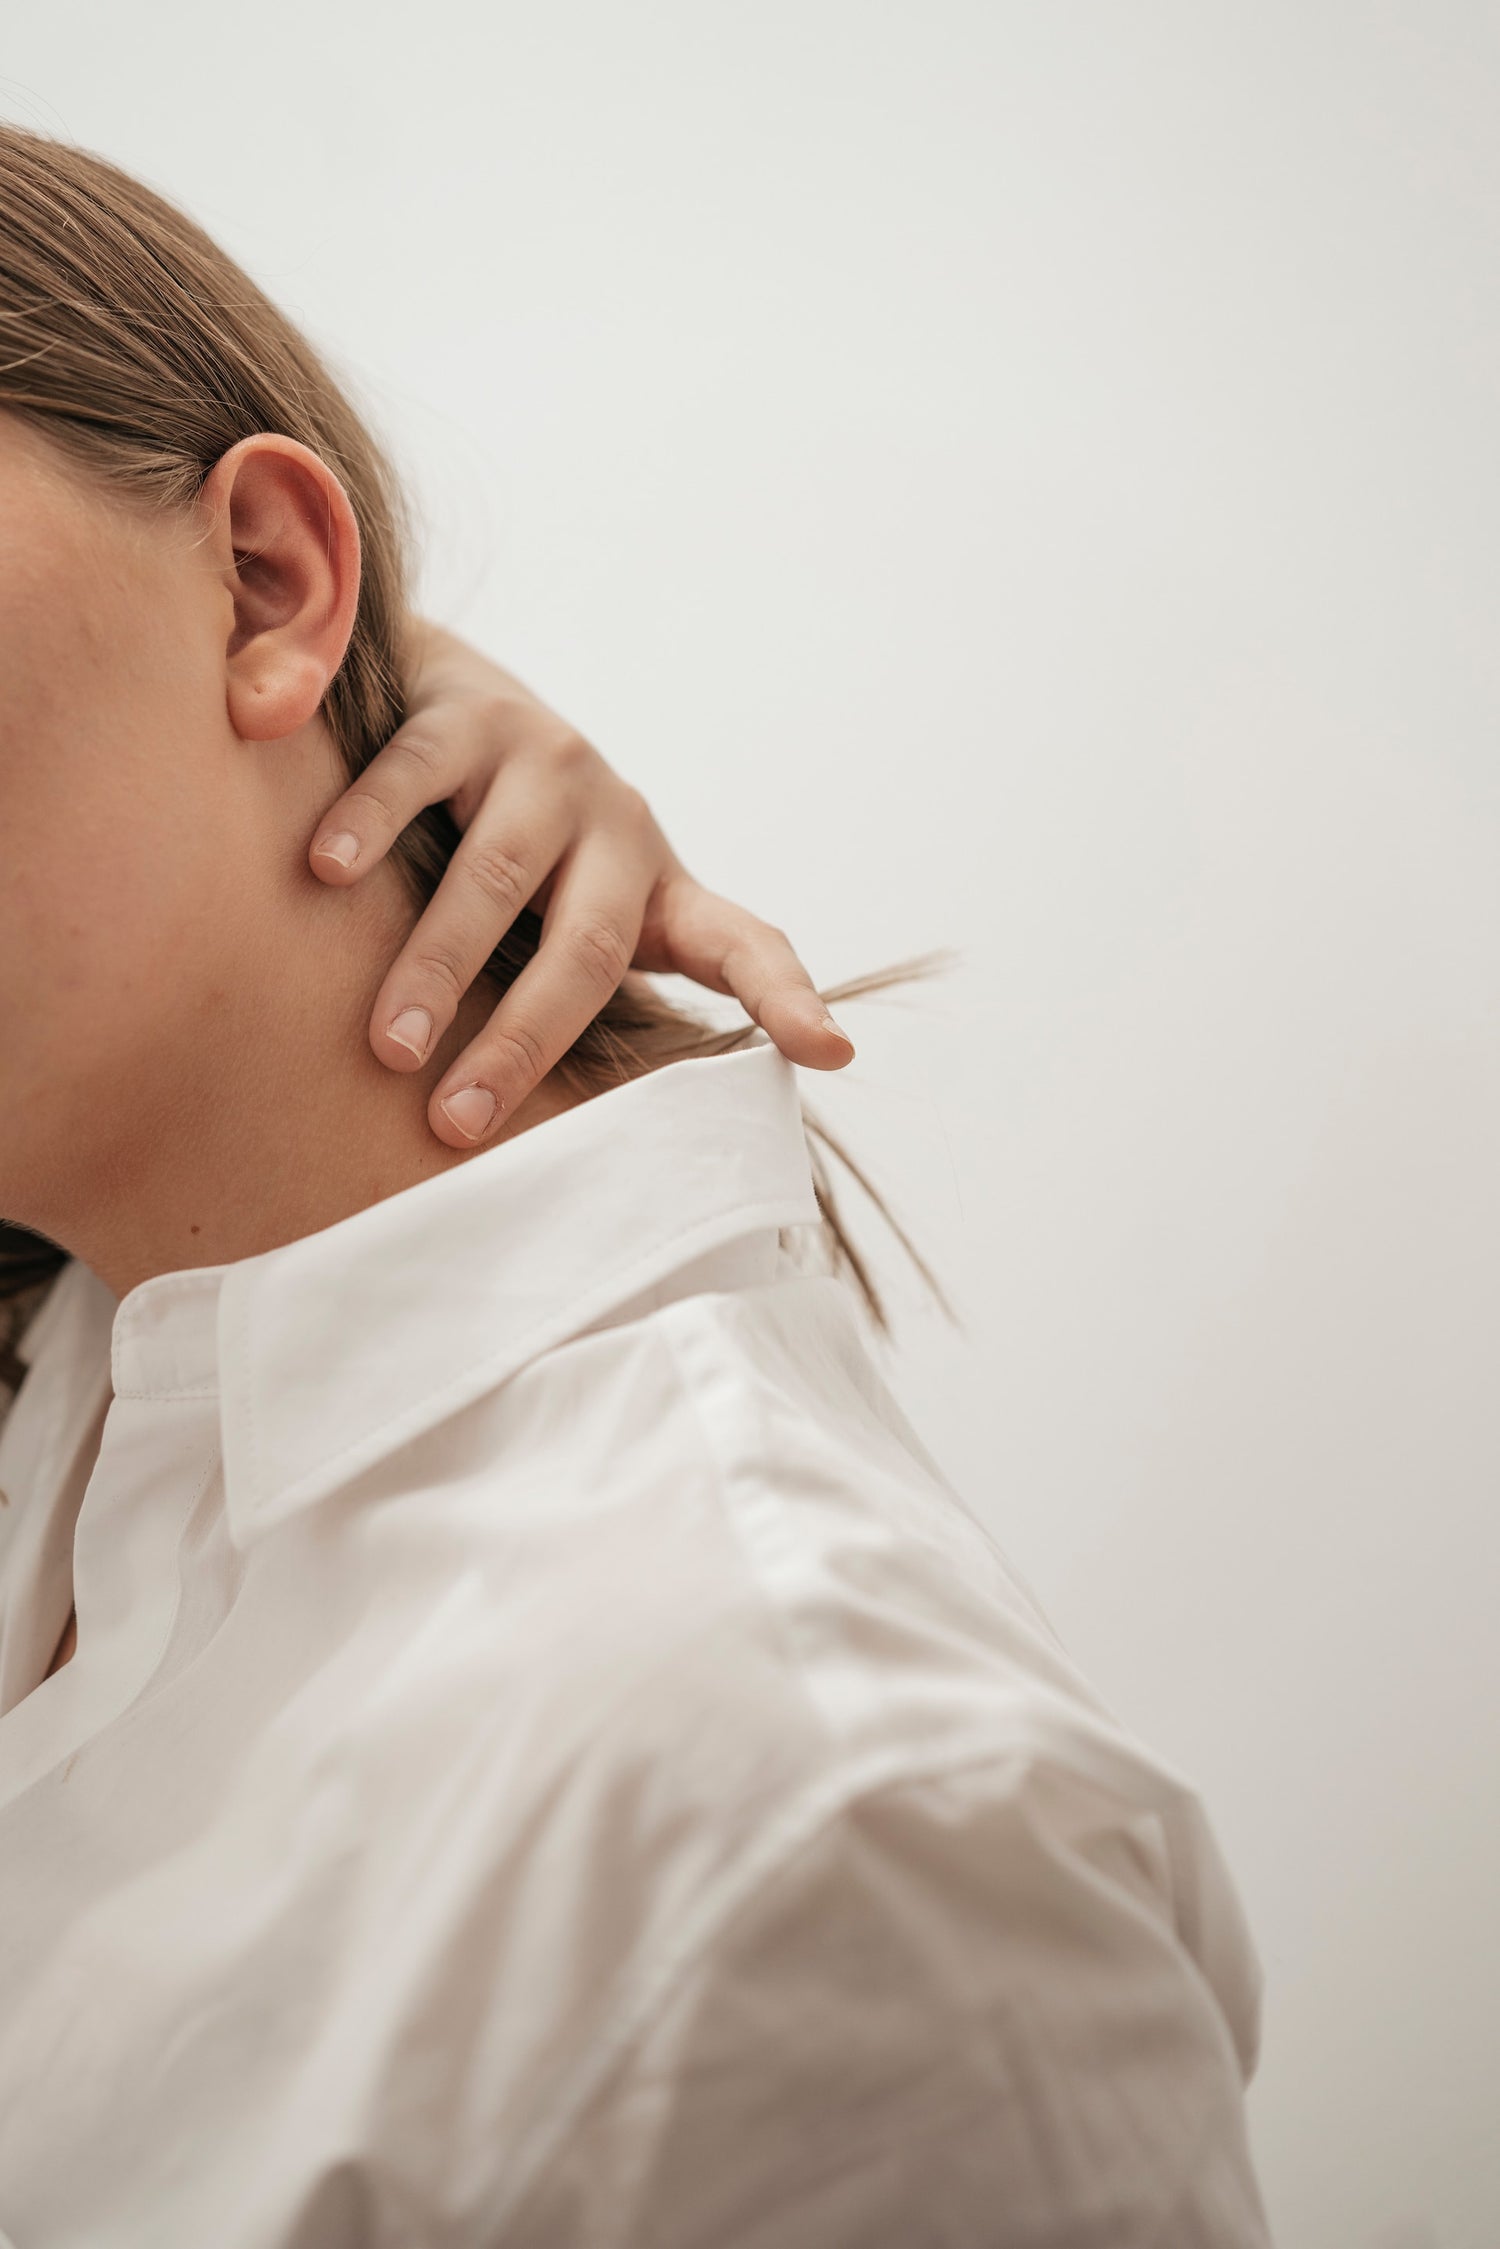 4 Simple Exercises to Relieve Neck Pain